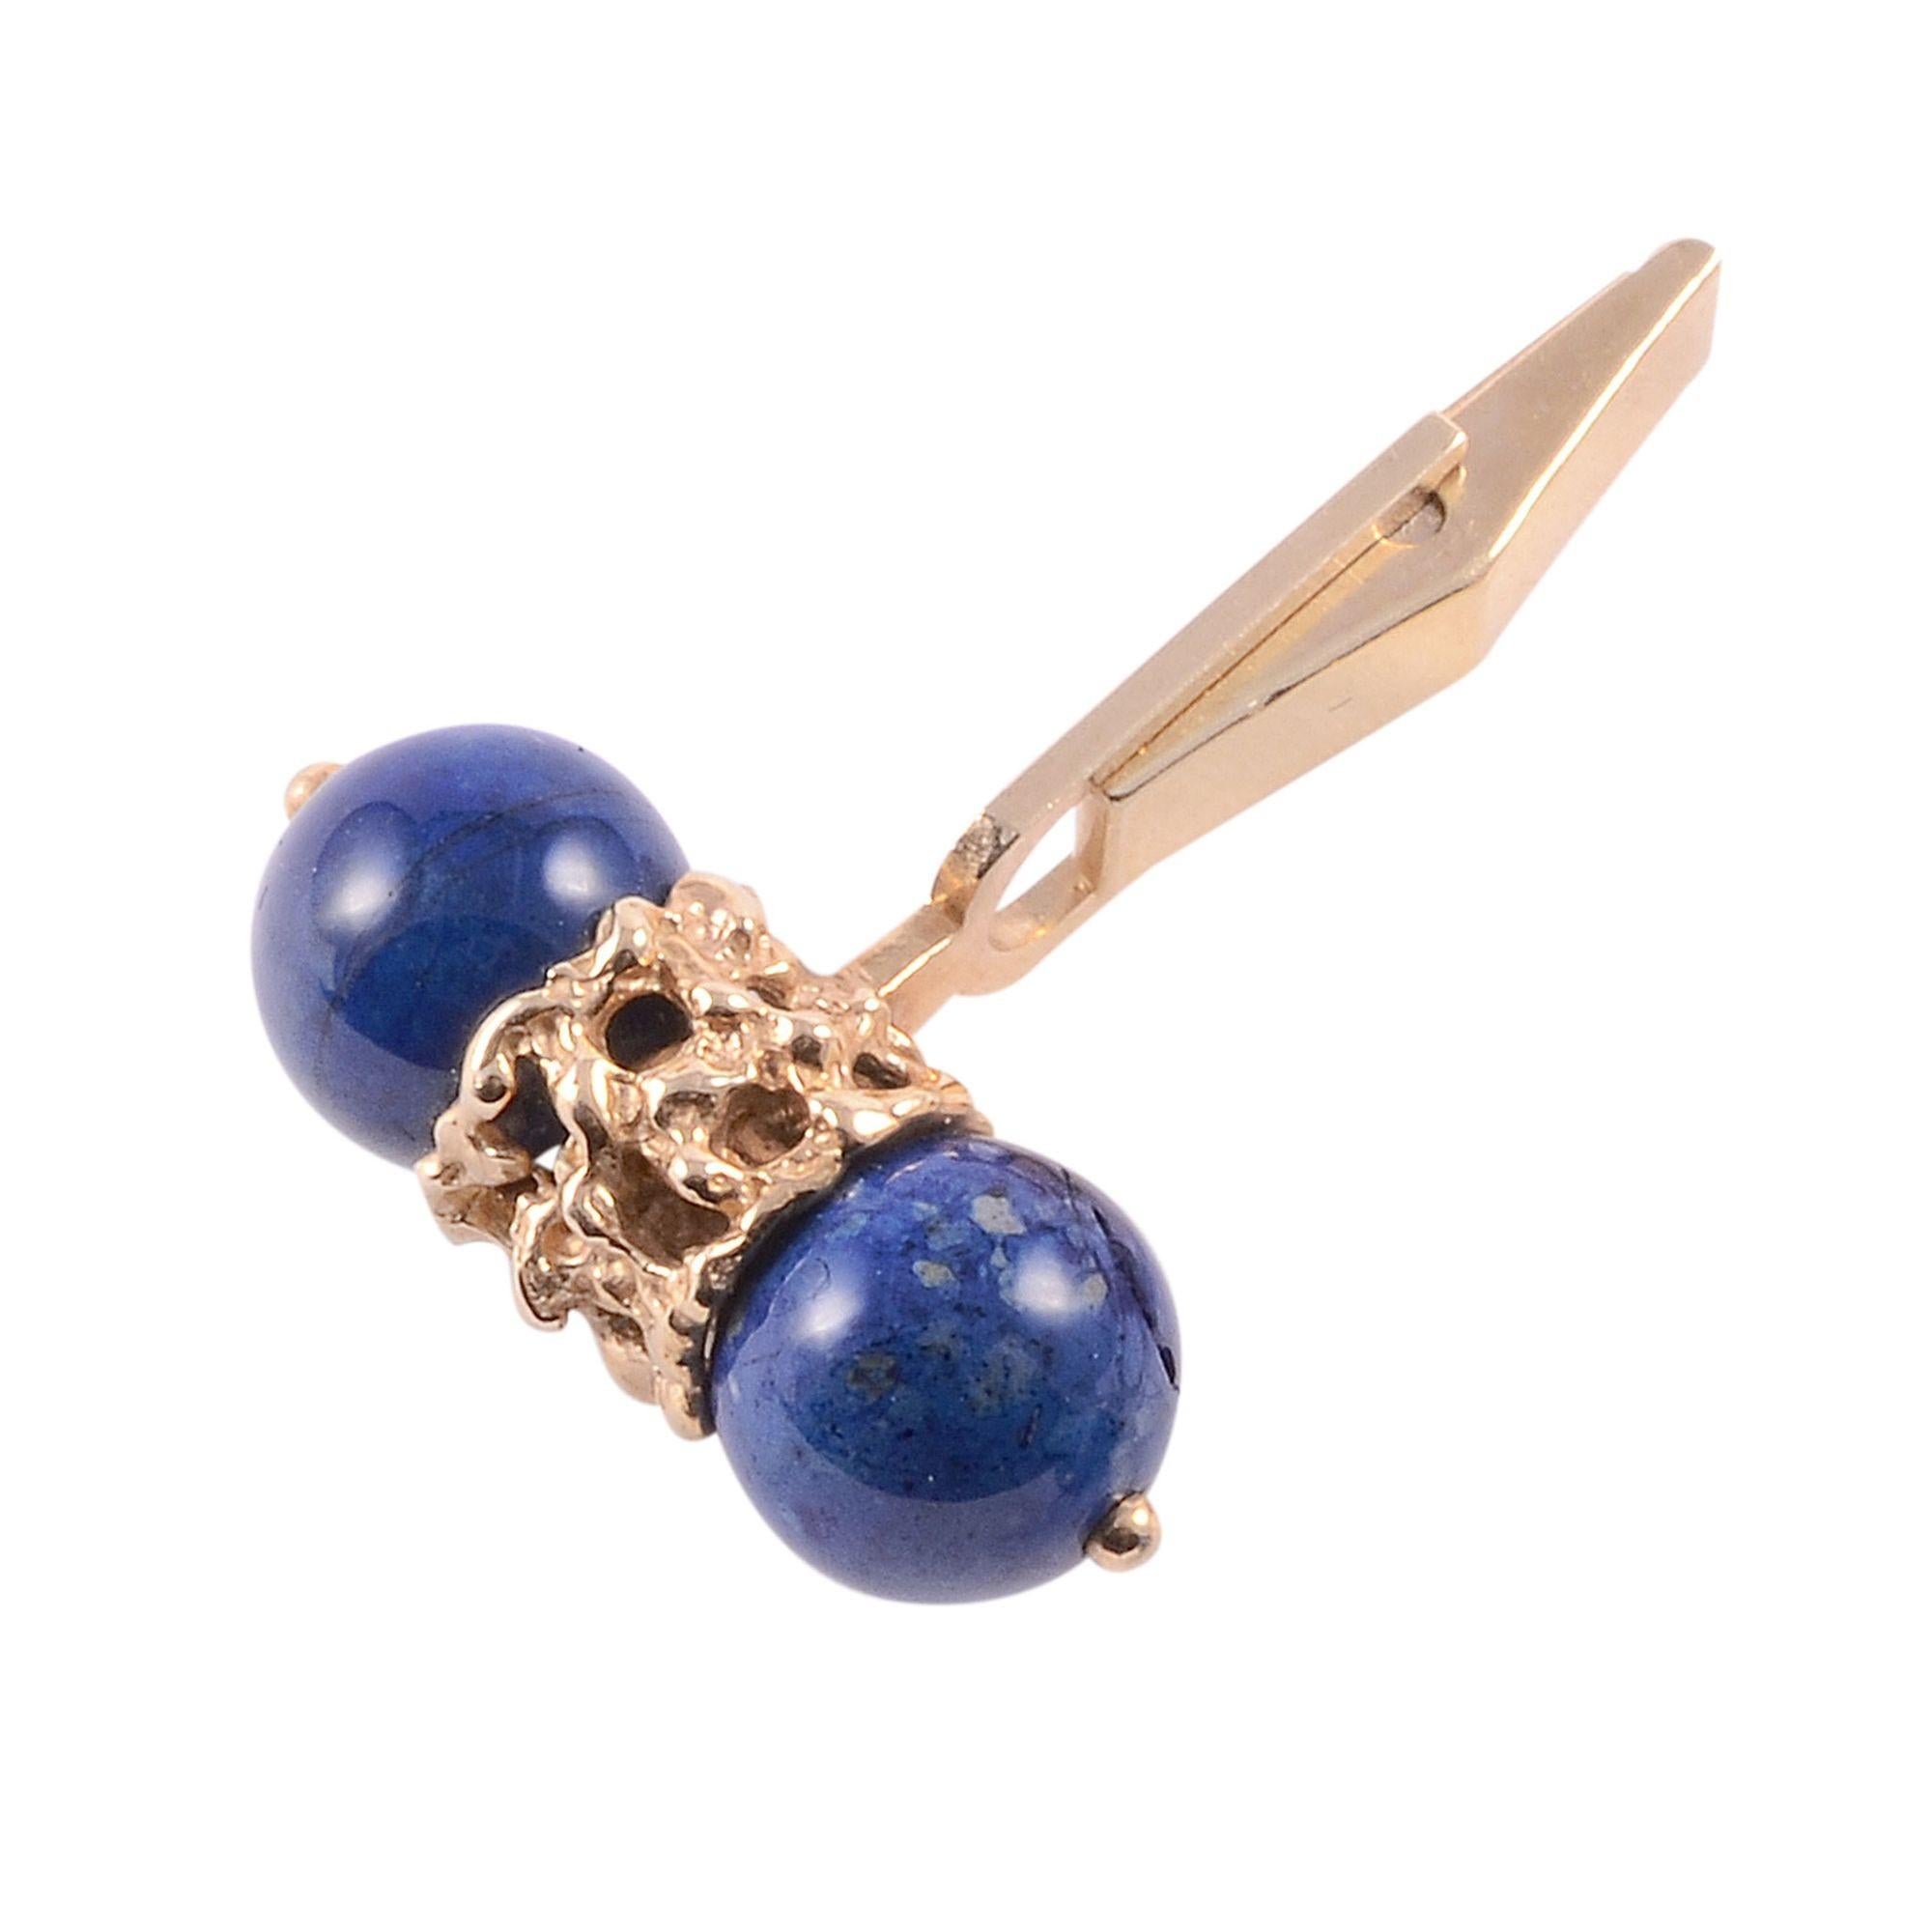 Lapis Lazuli Cufflinks In Good Condition For Sale In Solvang, CA